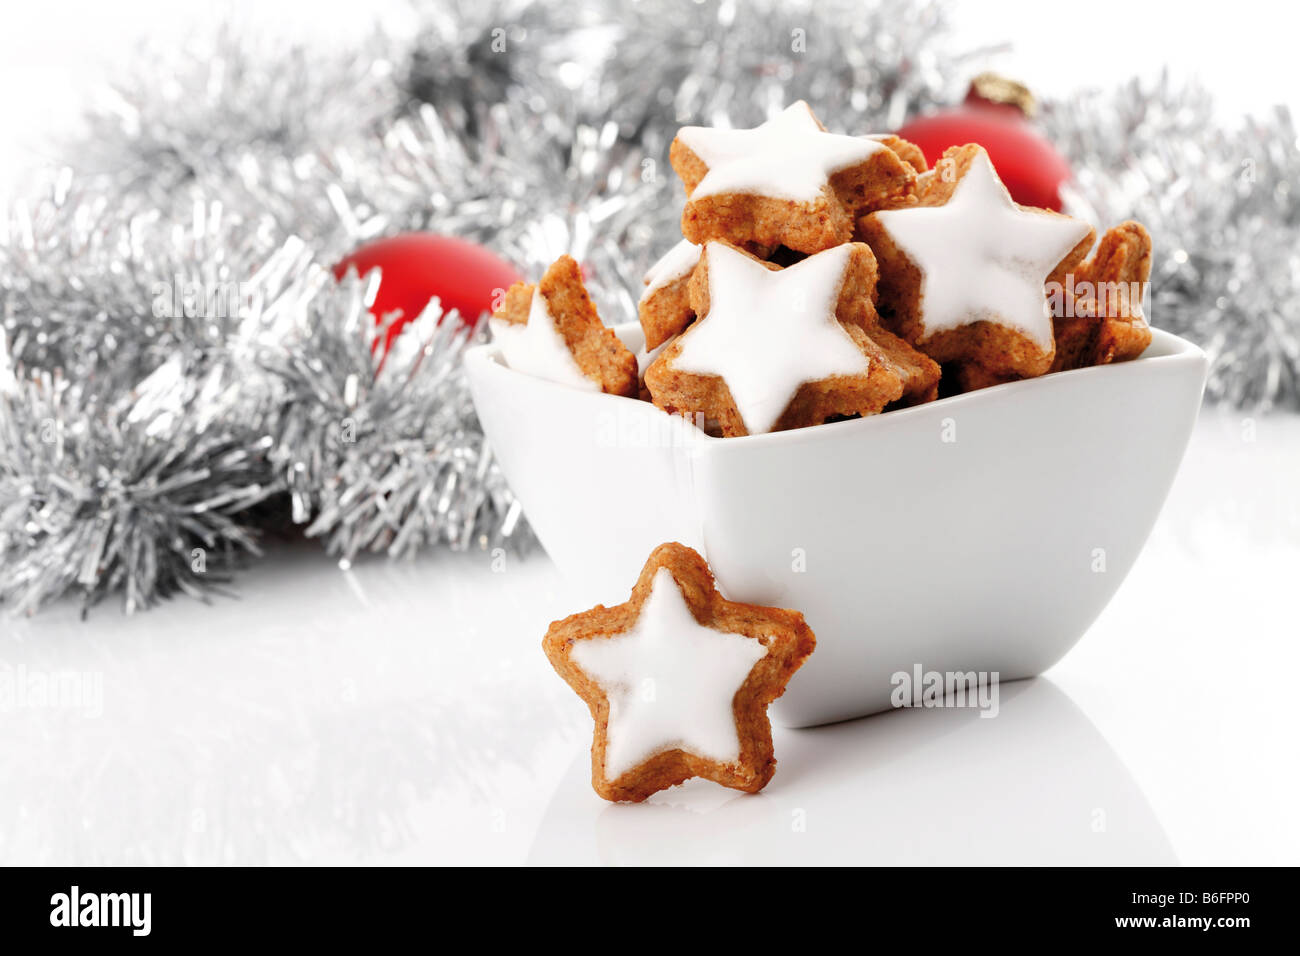 Cinnamon flavored star-shaped biscuits, christmas tree balls and decoration Stock Photo